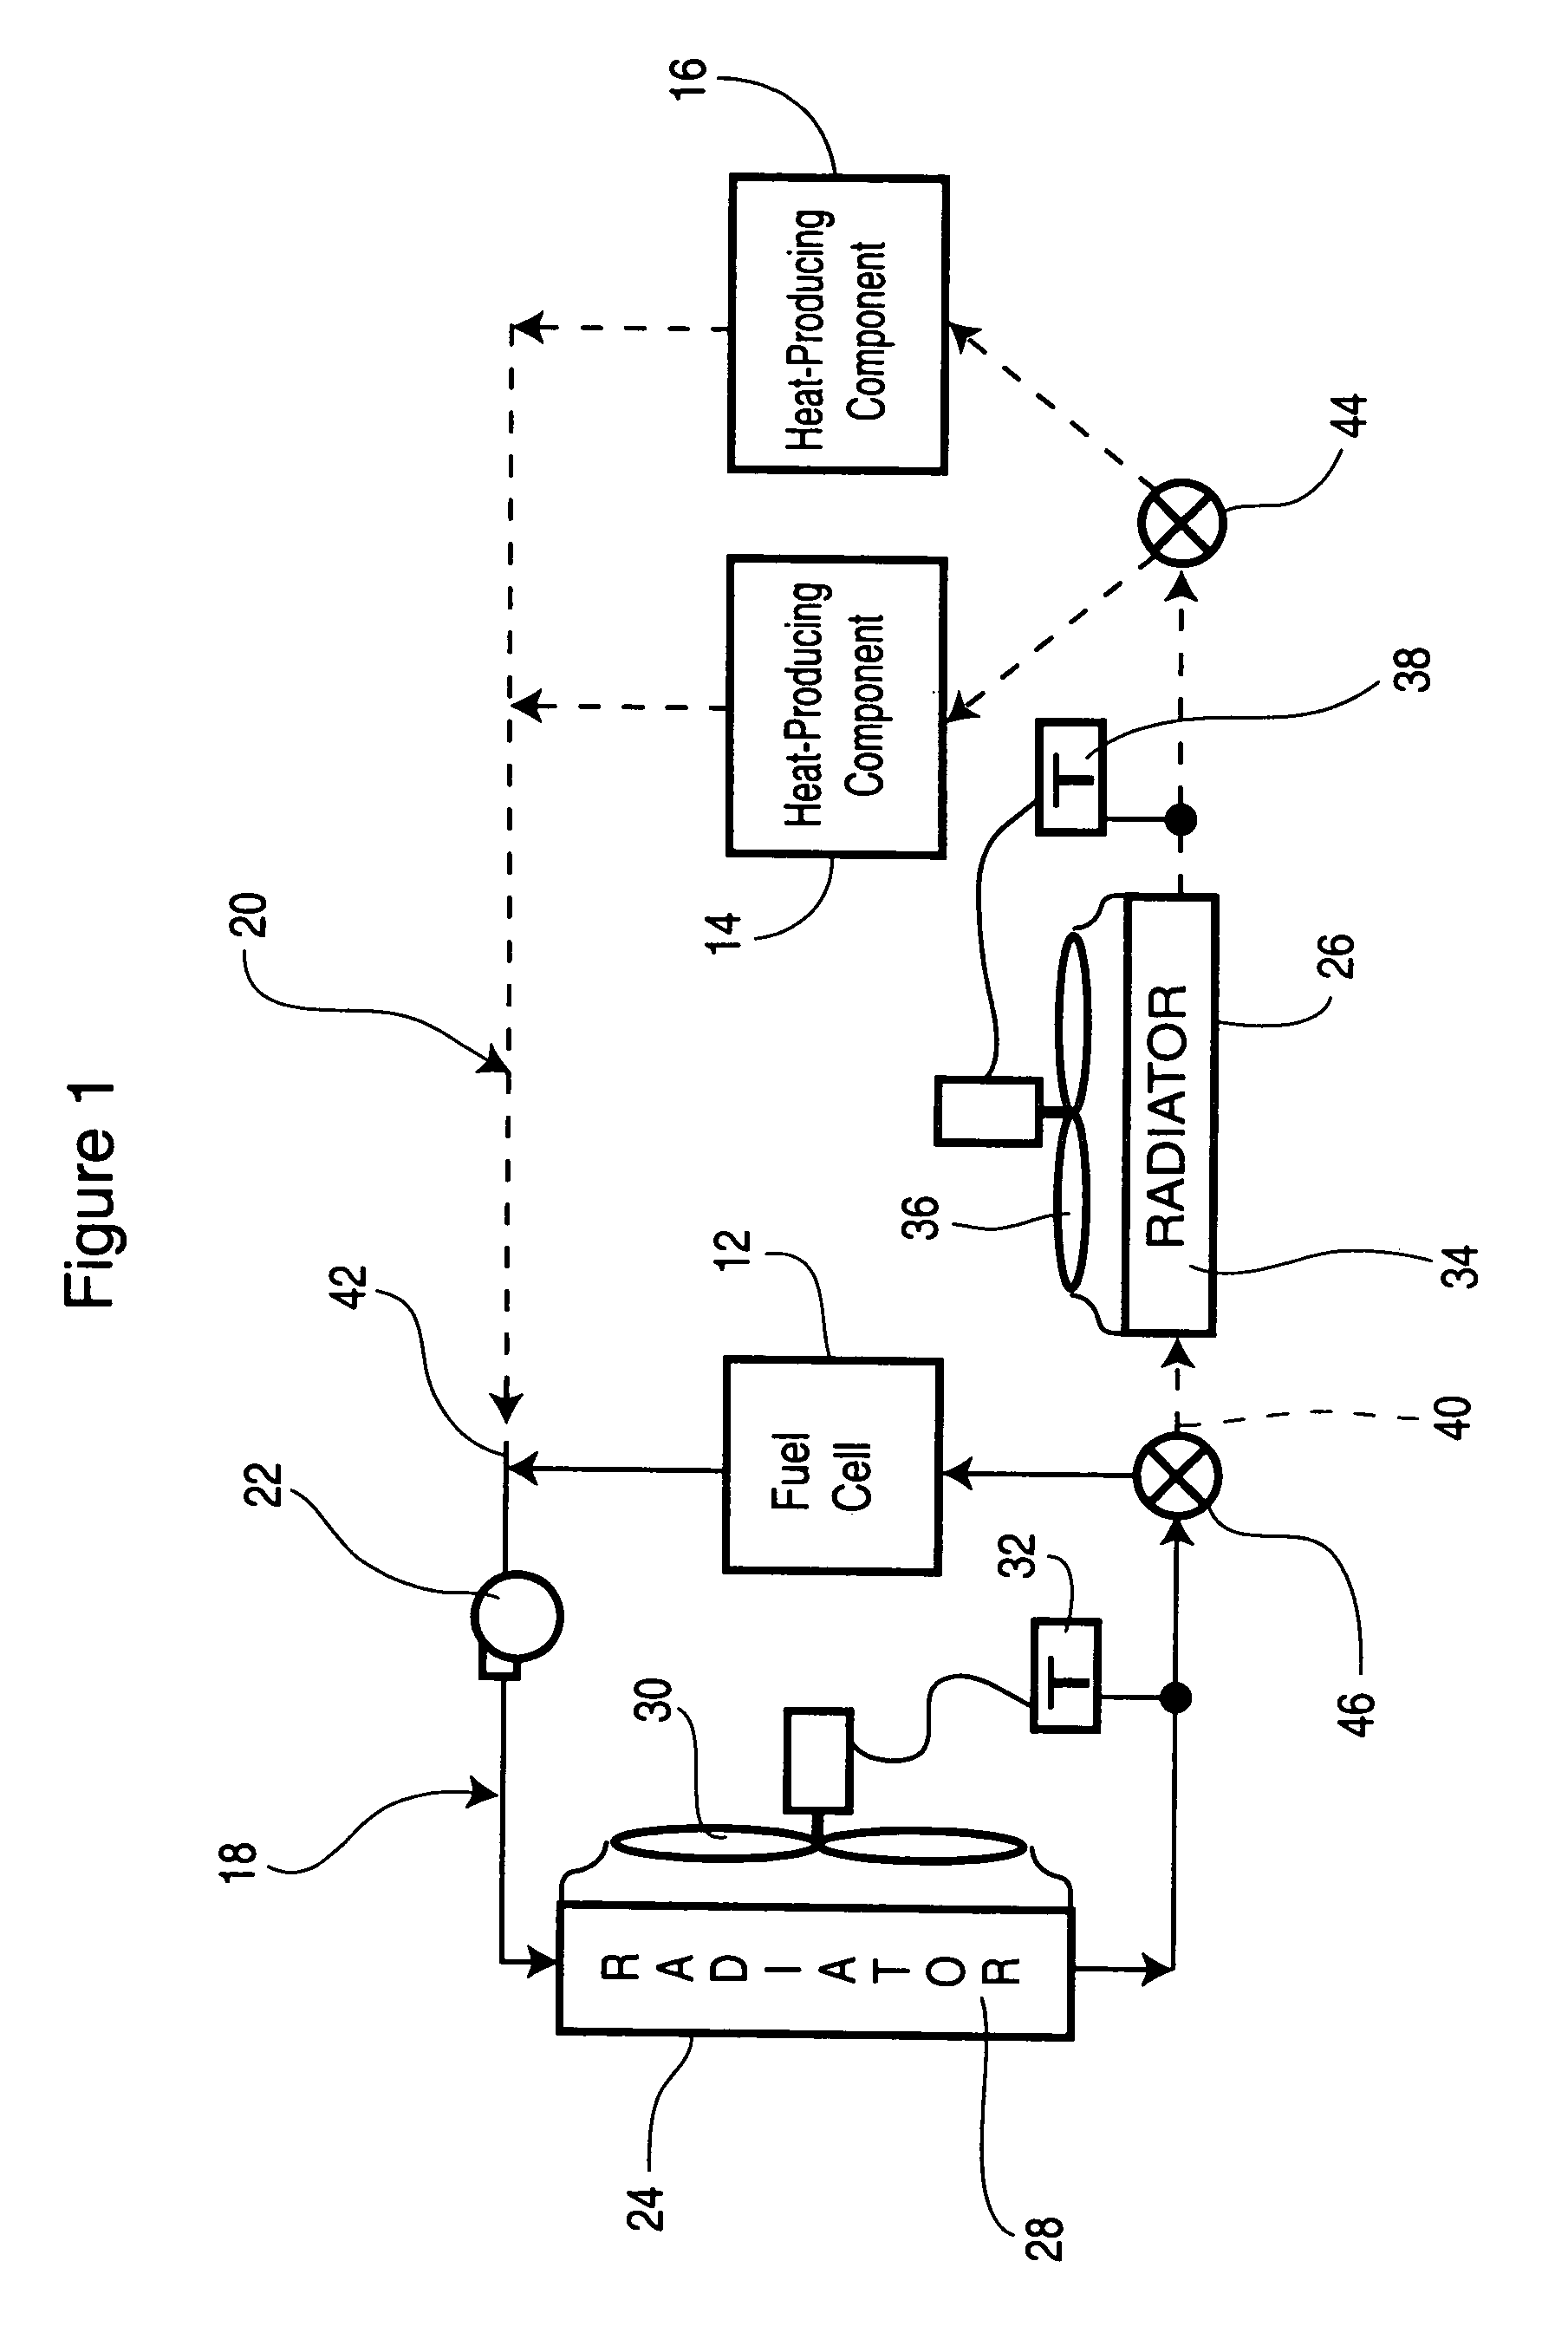 Thermal management system